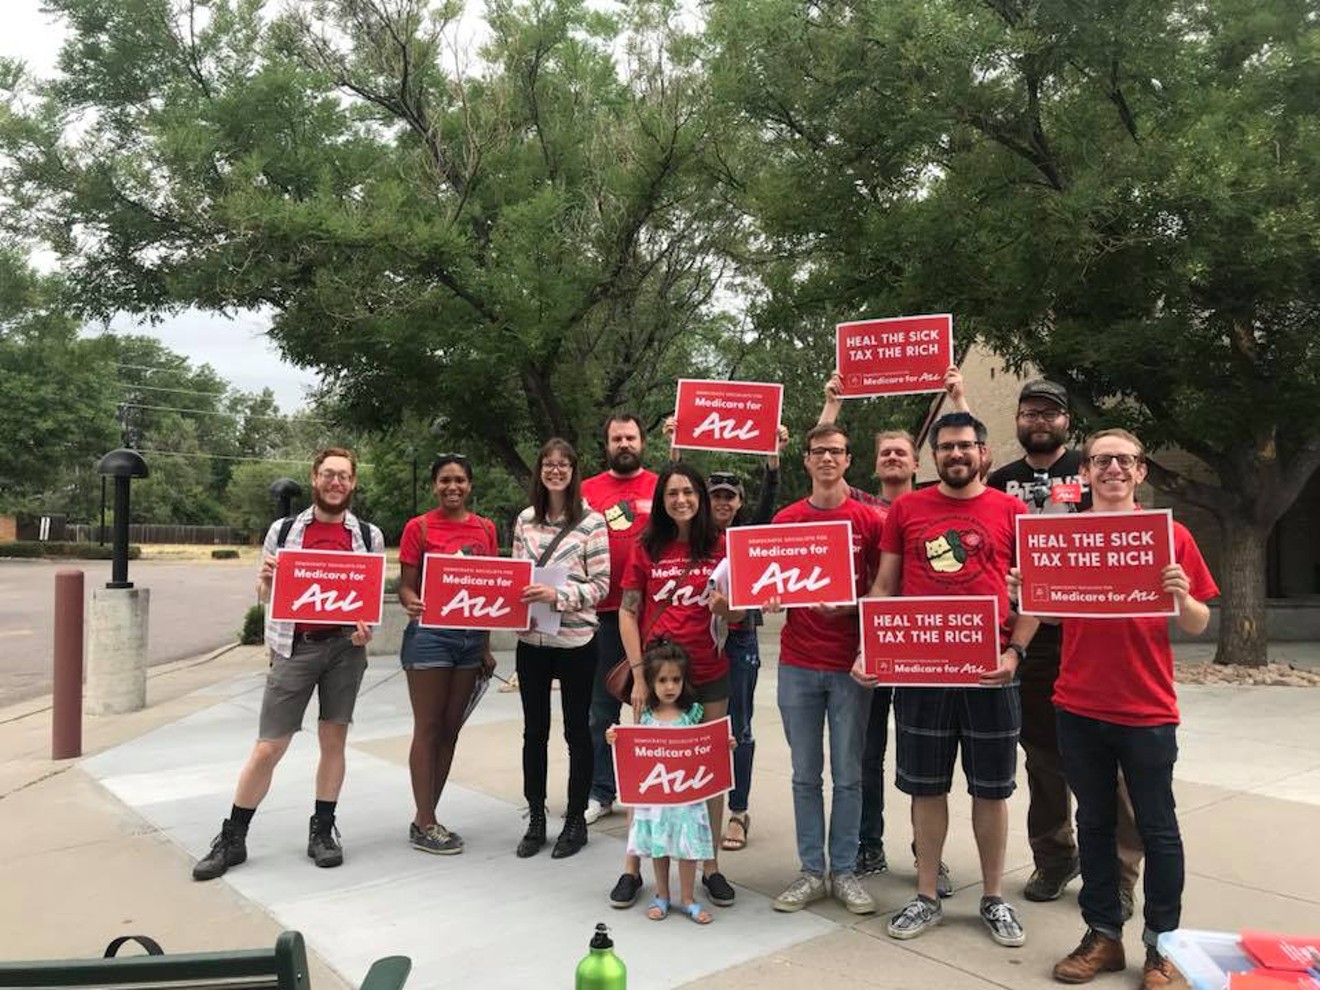 Local DSA members are involved in canvassing efforts for a Medicare for All single-payer health-care system.